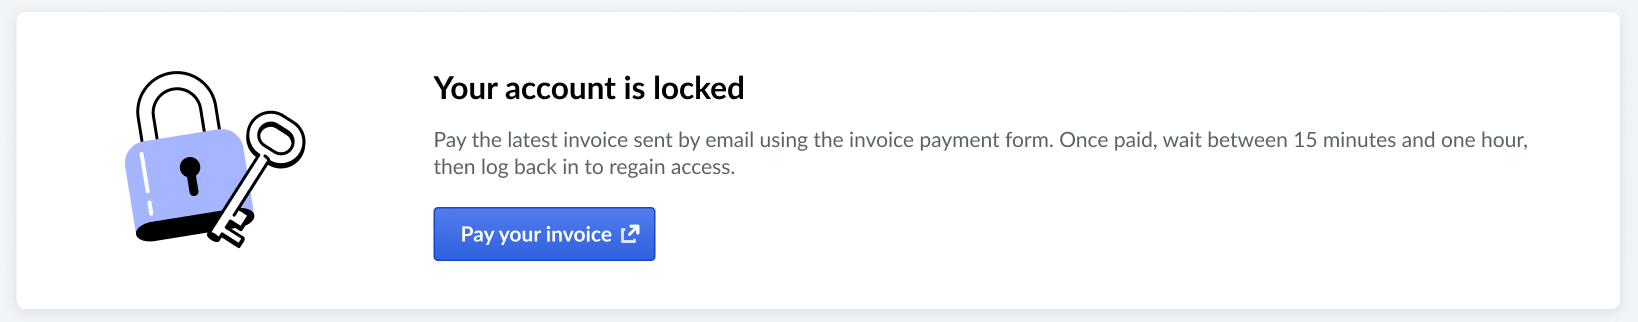 Example of the banner indicating your account is locked.